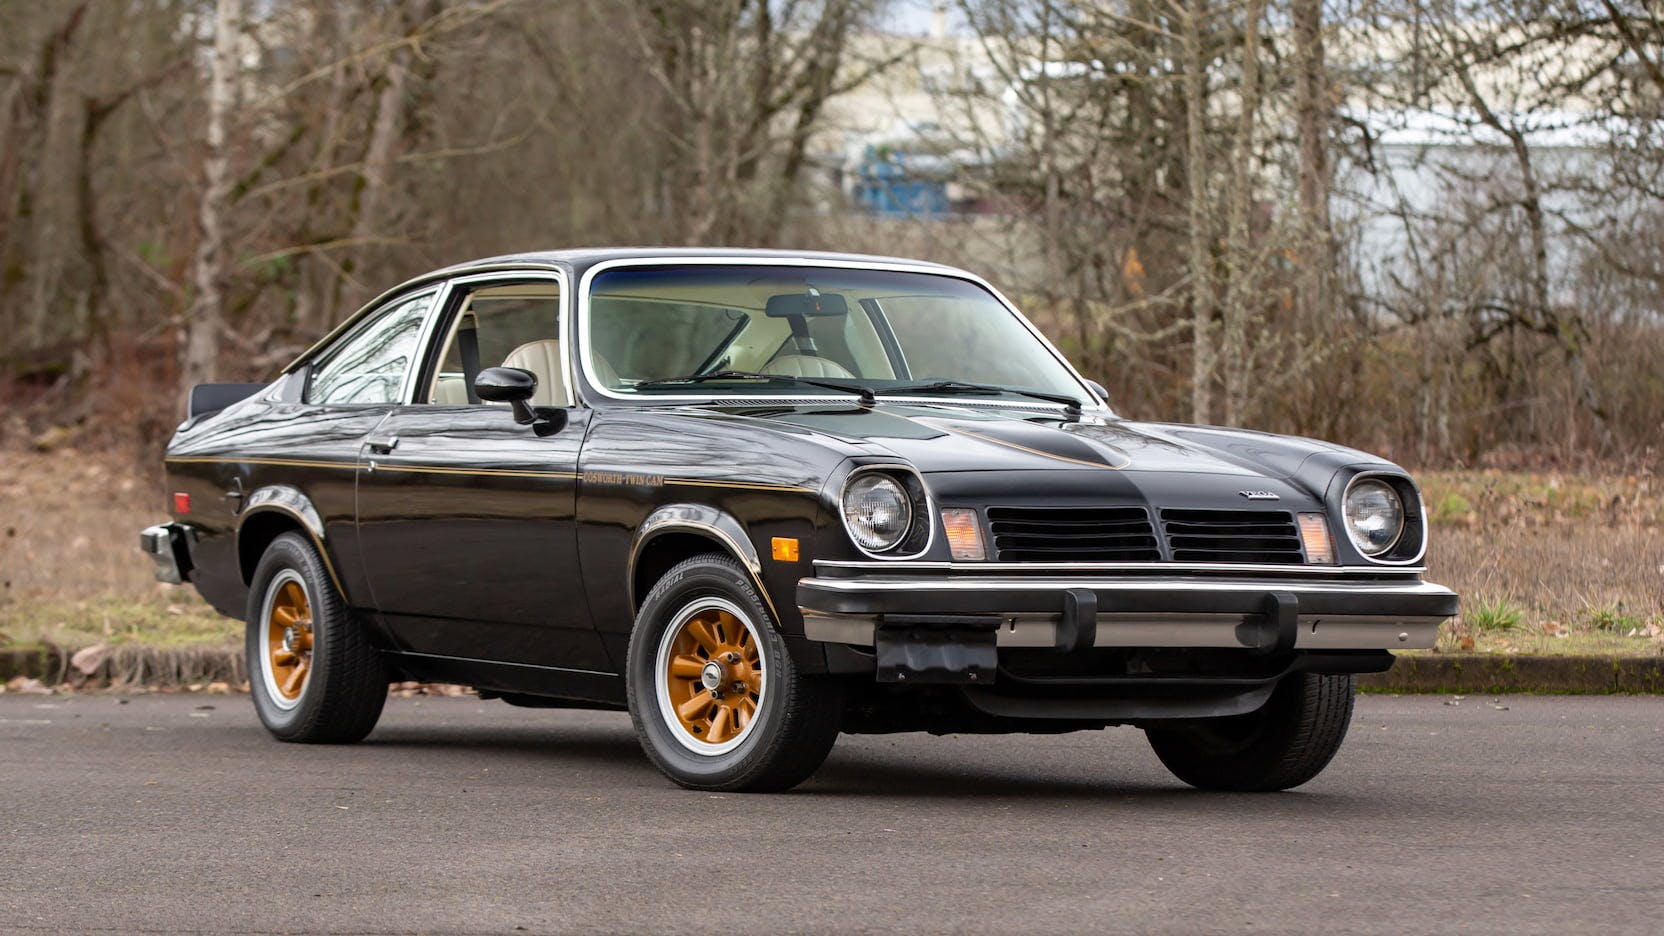 Chevy Cosworth Vega: The BMW-fighter that wasn't - Hagerty Media